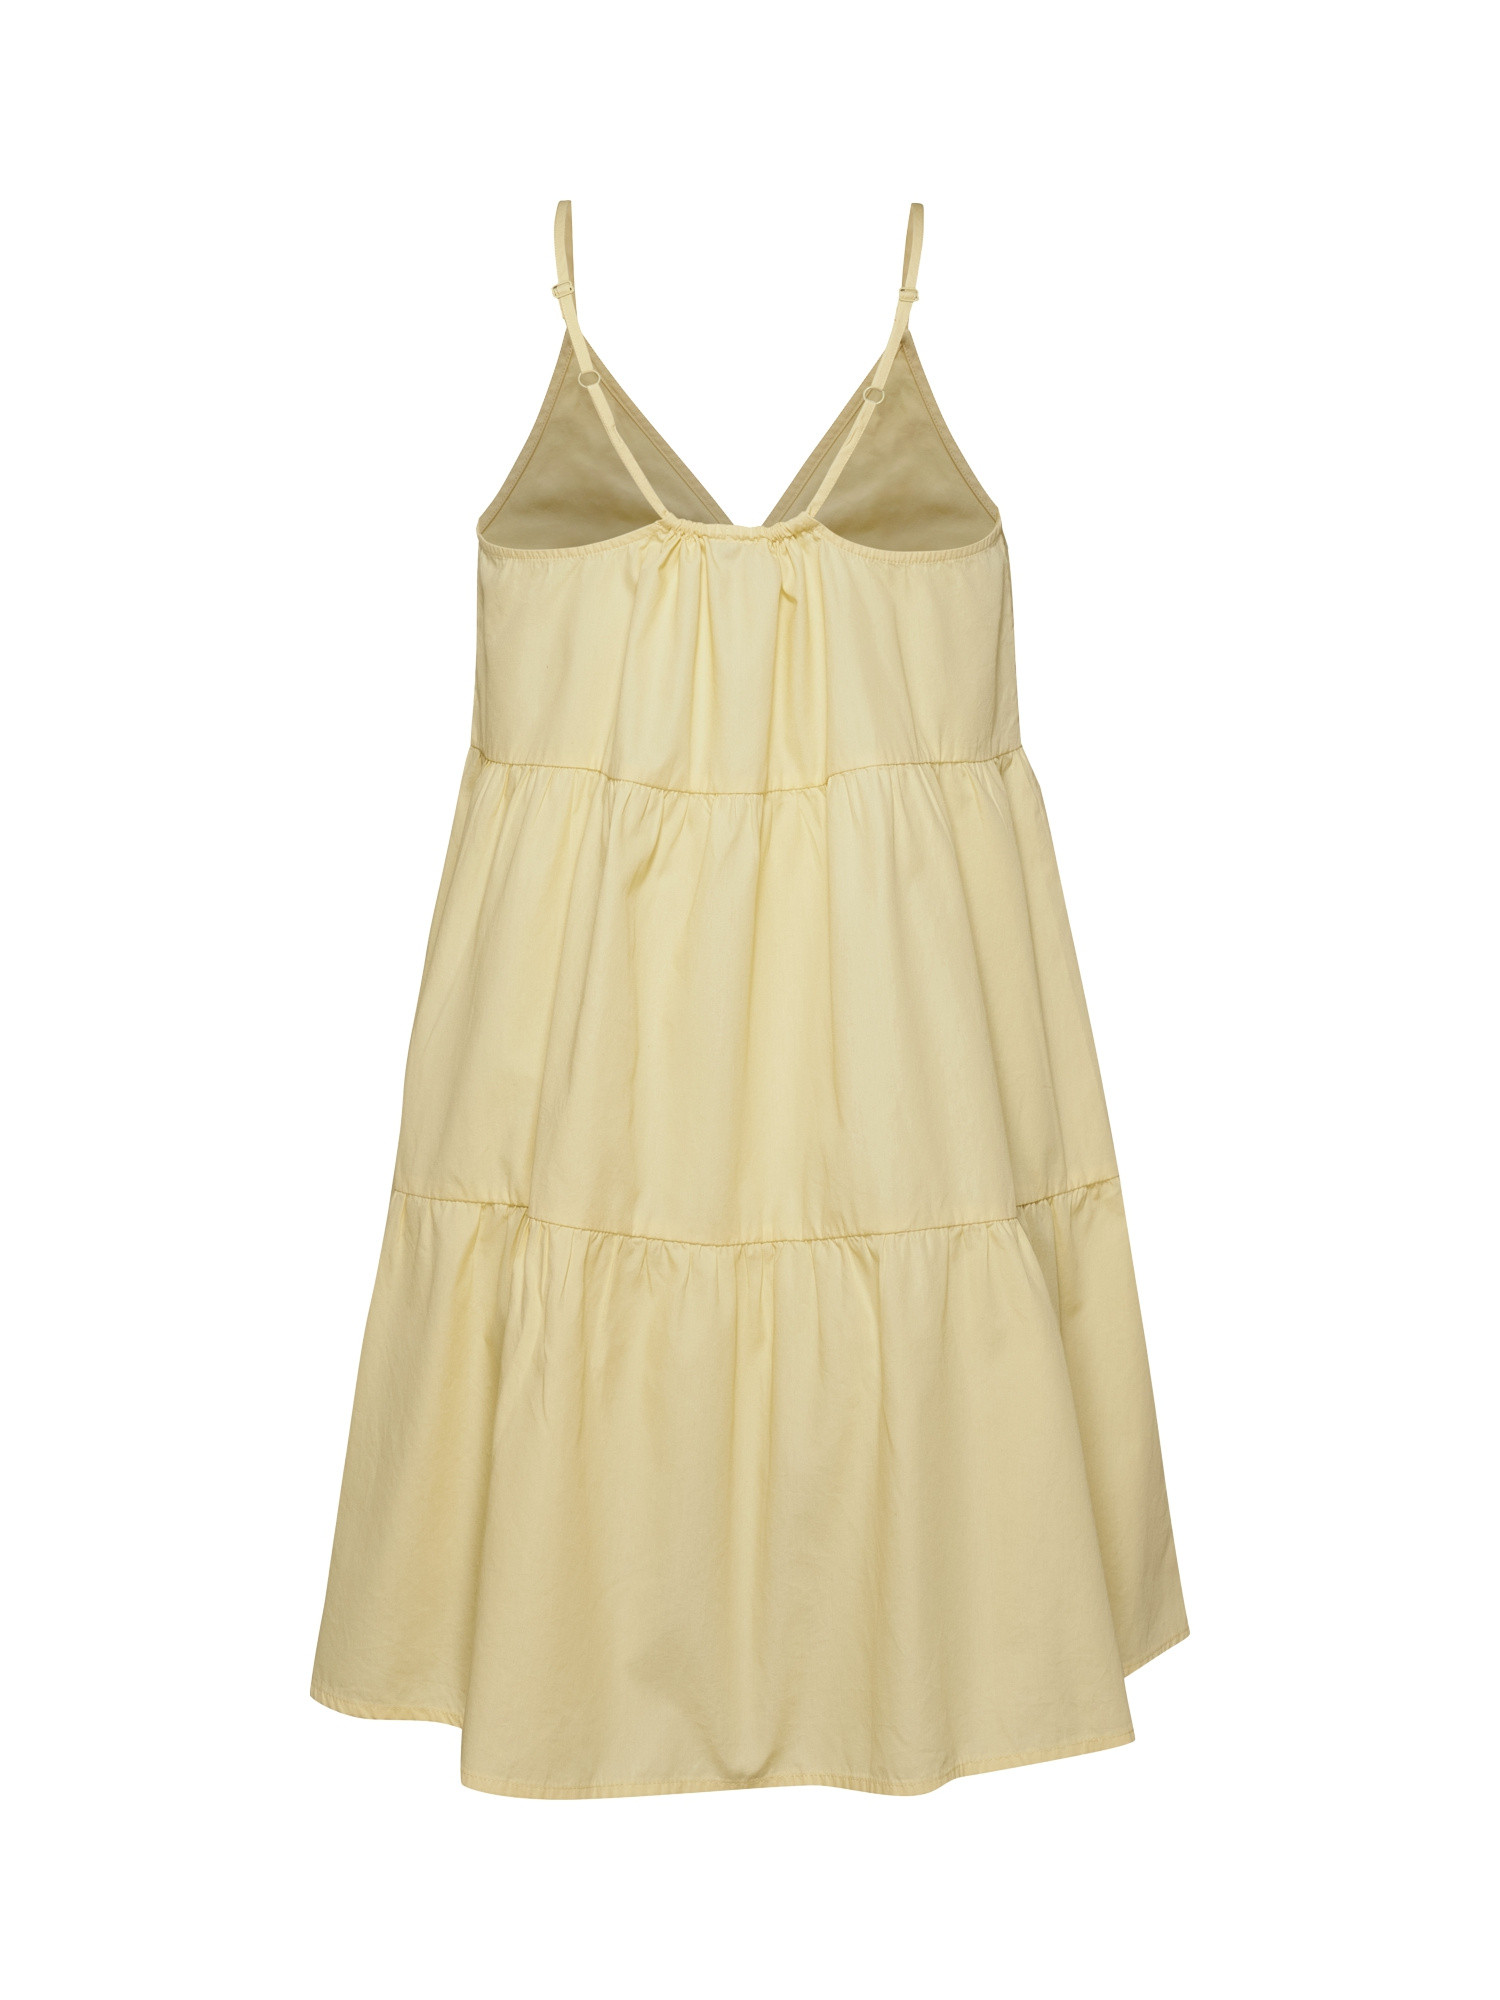 Tommy Jeans - Flounced dress in cotton, Light Yellow, large image number 1